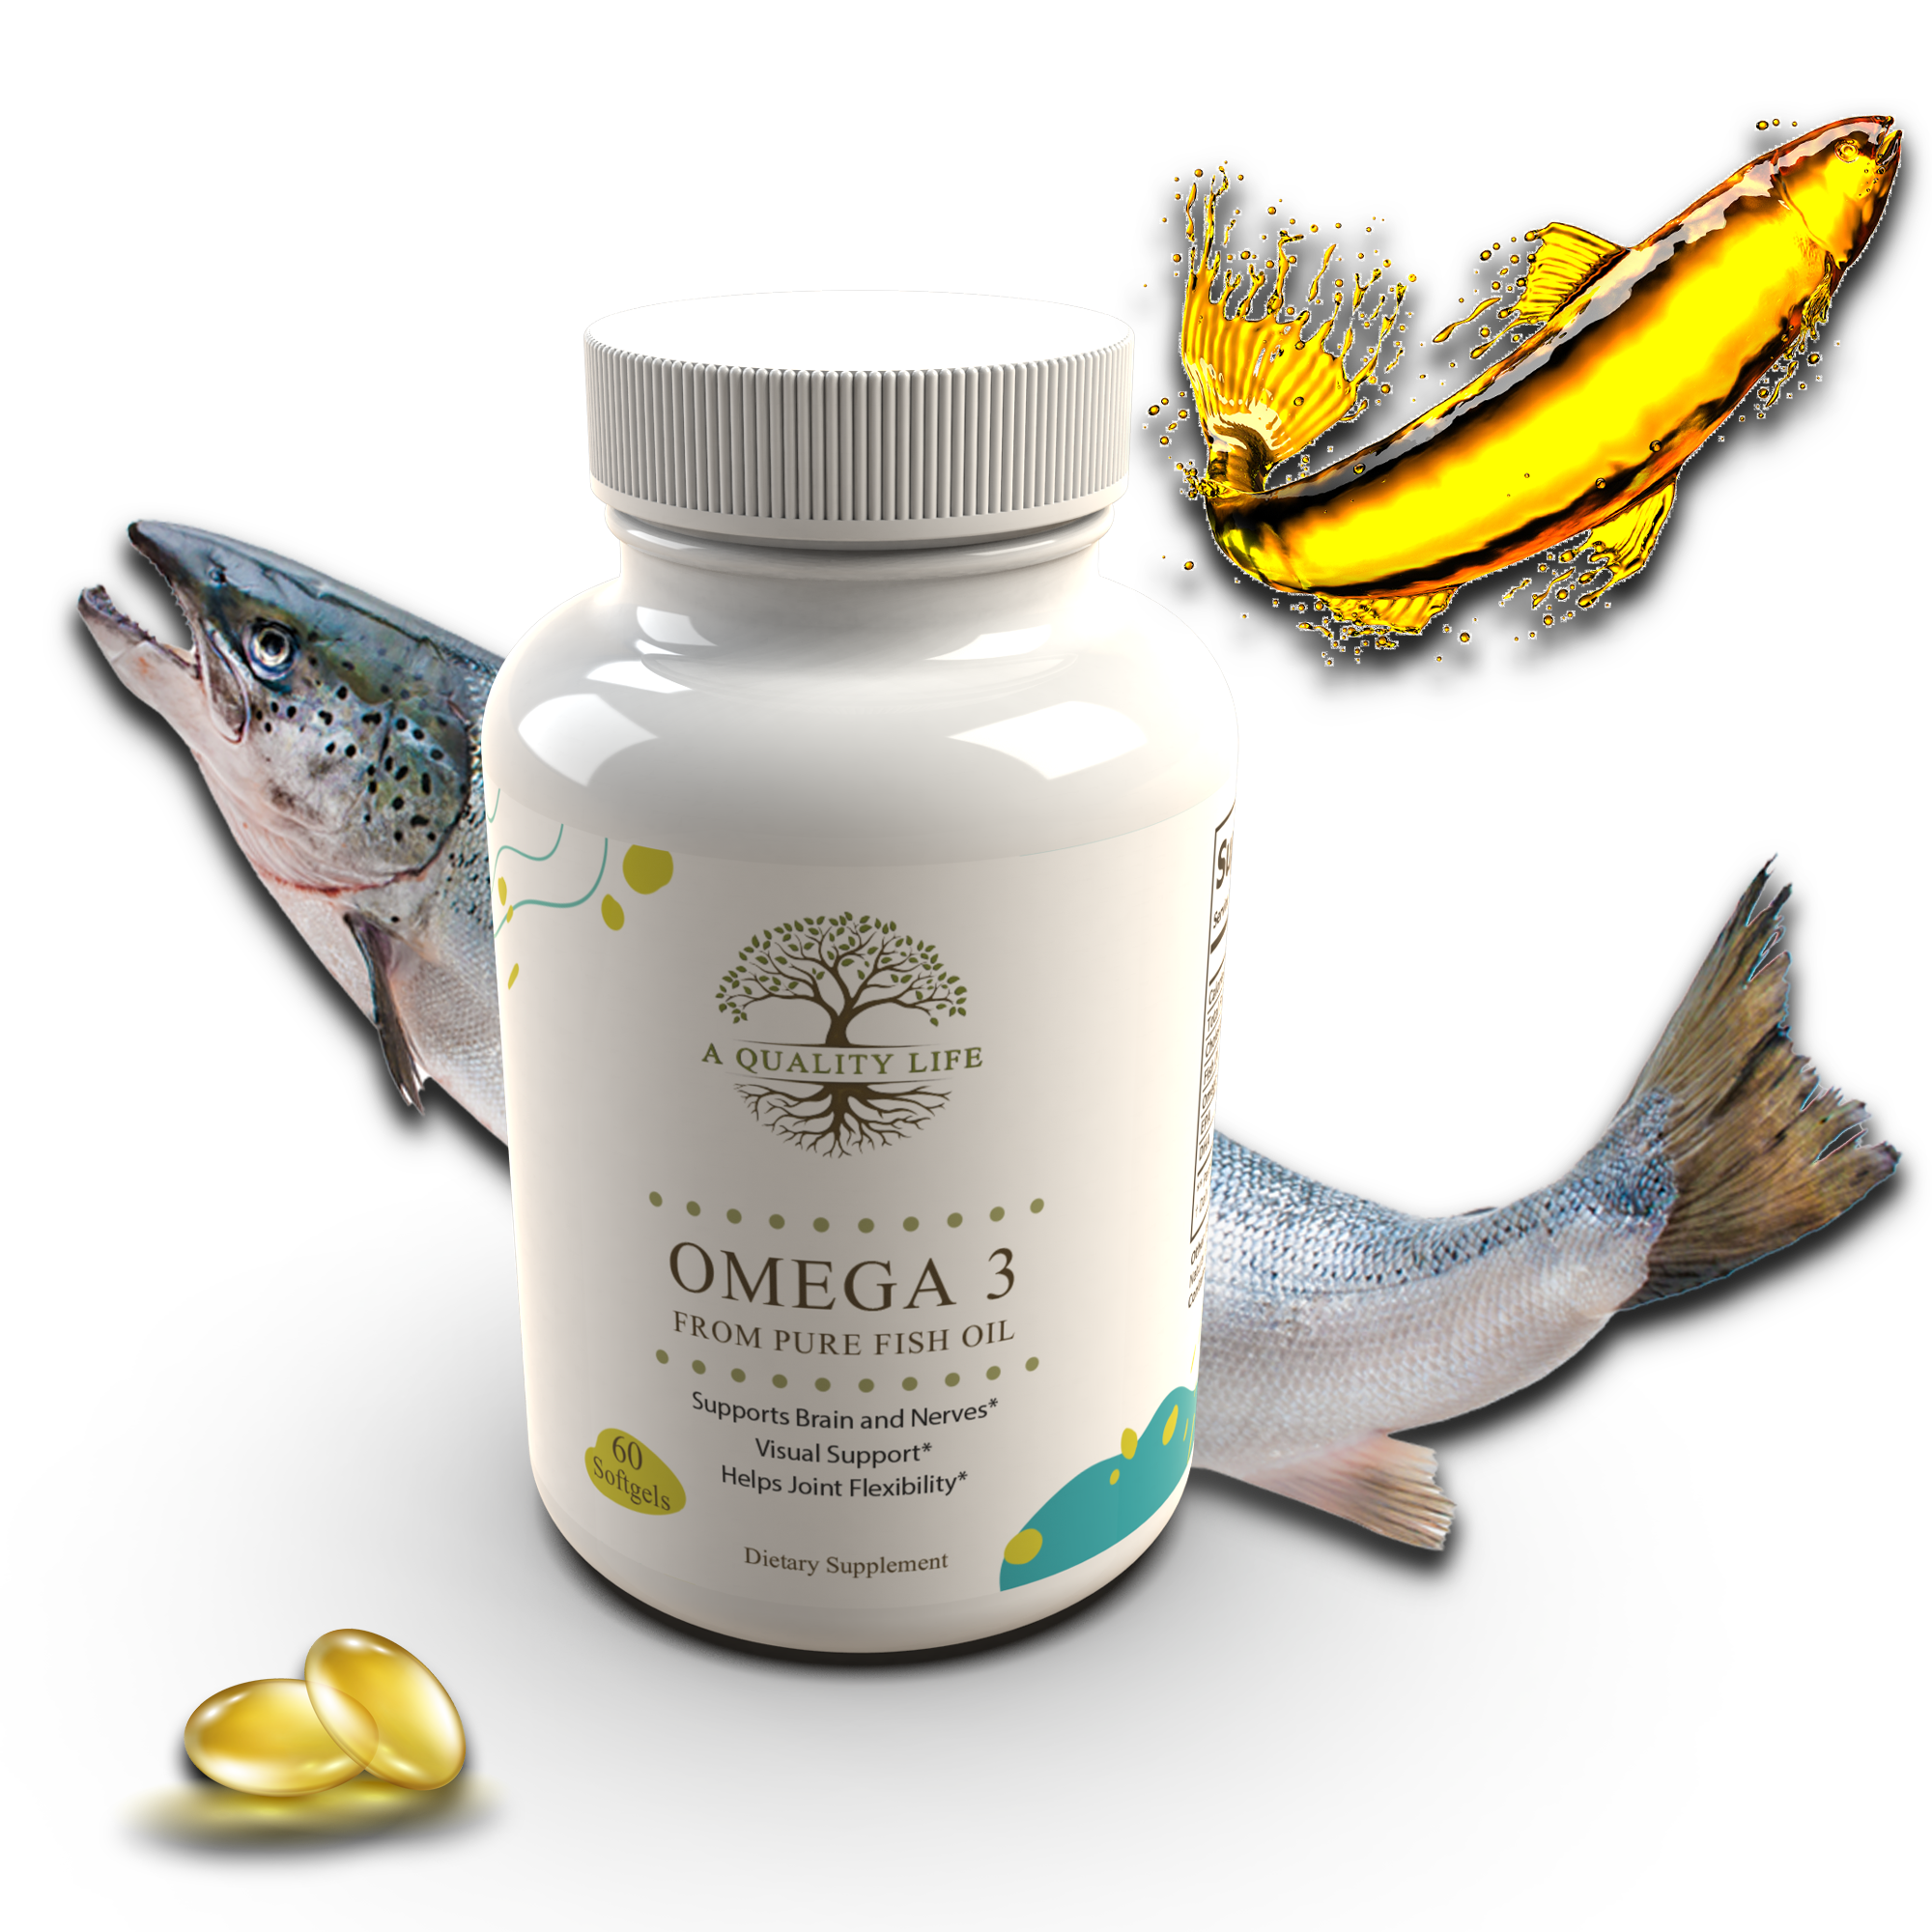 OMEGA 3 From Pure Fish Oil